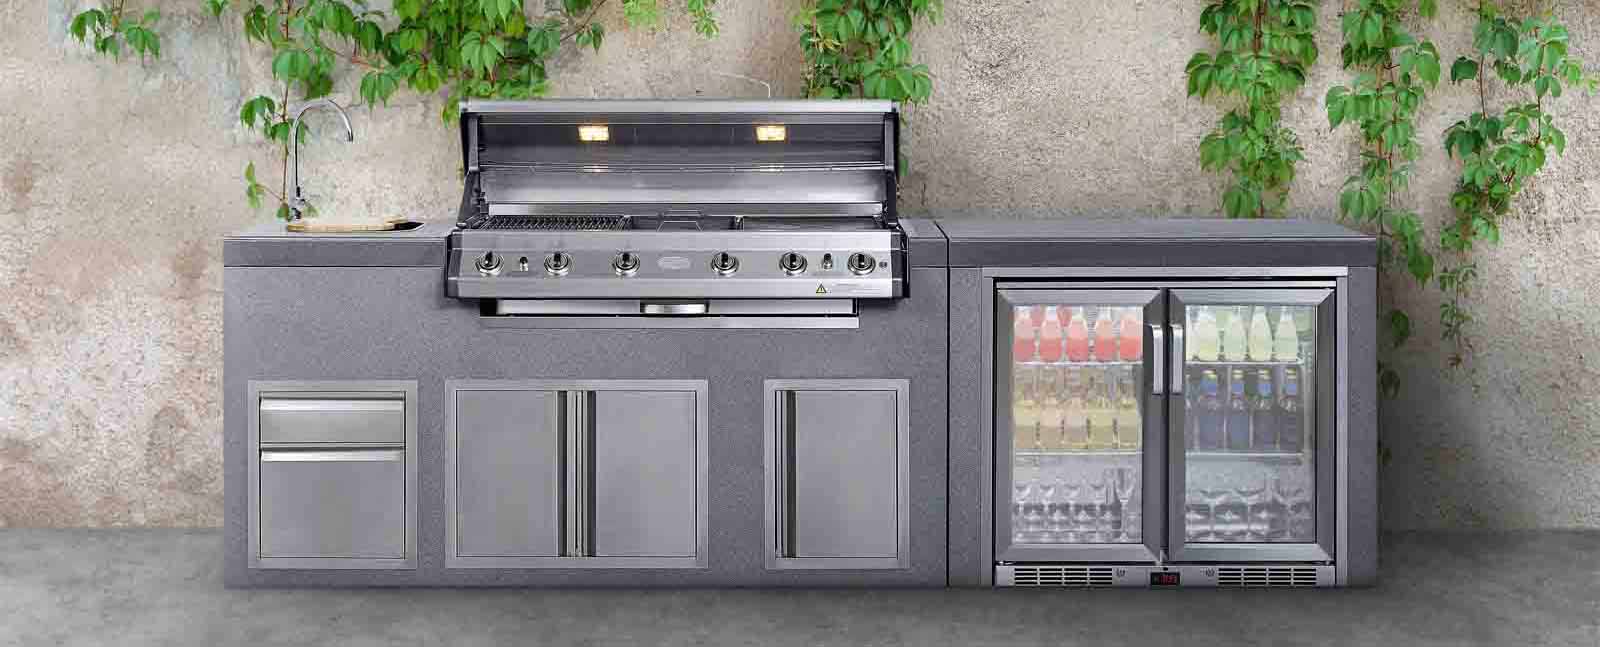 20 of the Best Outdoor Kitchens for Summer Entertaining   Harvey ...